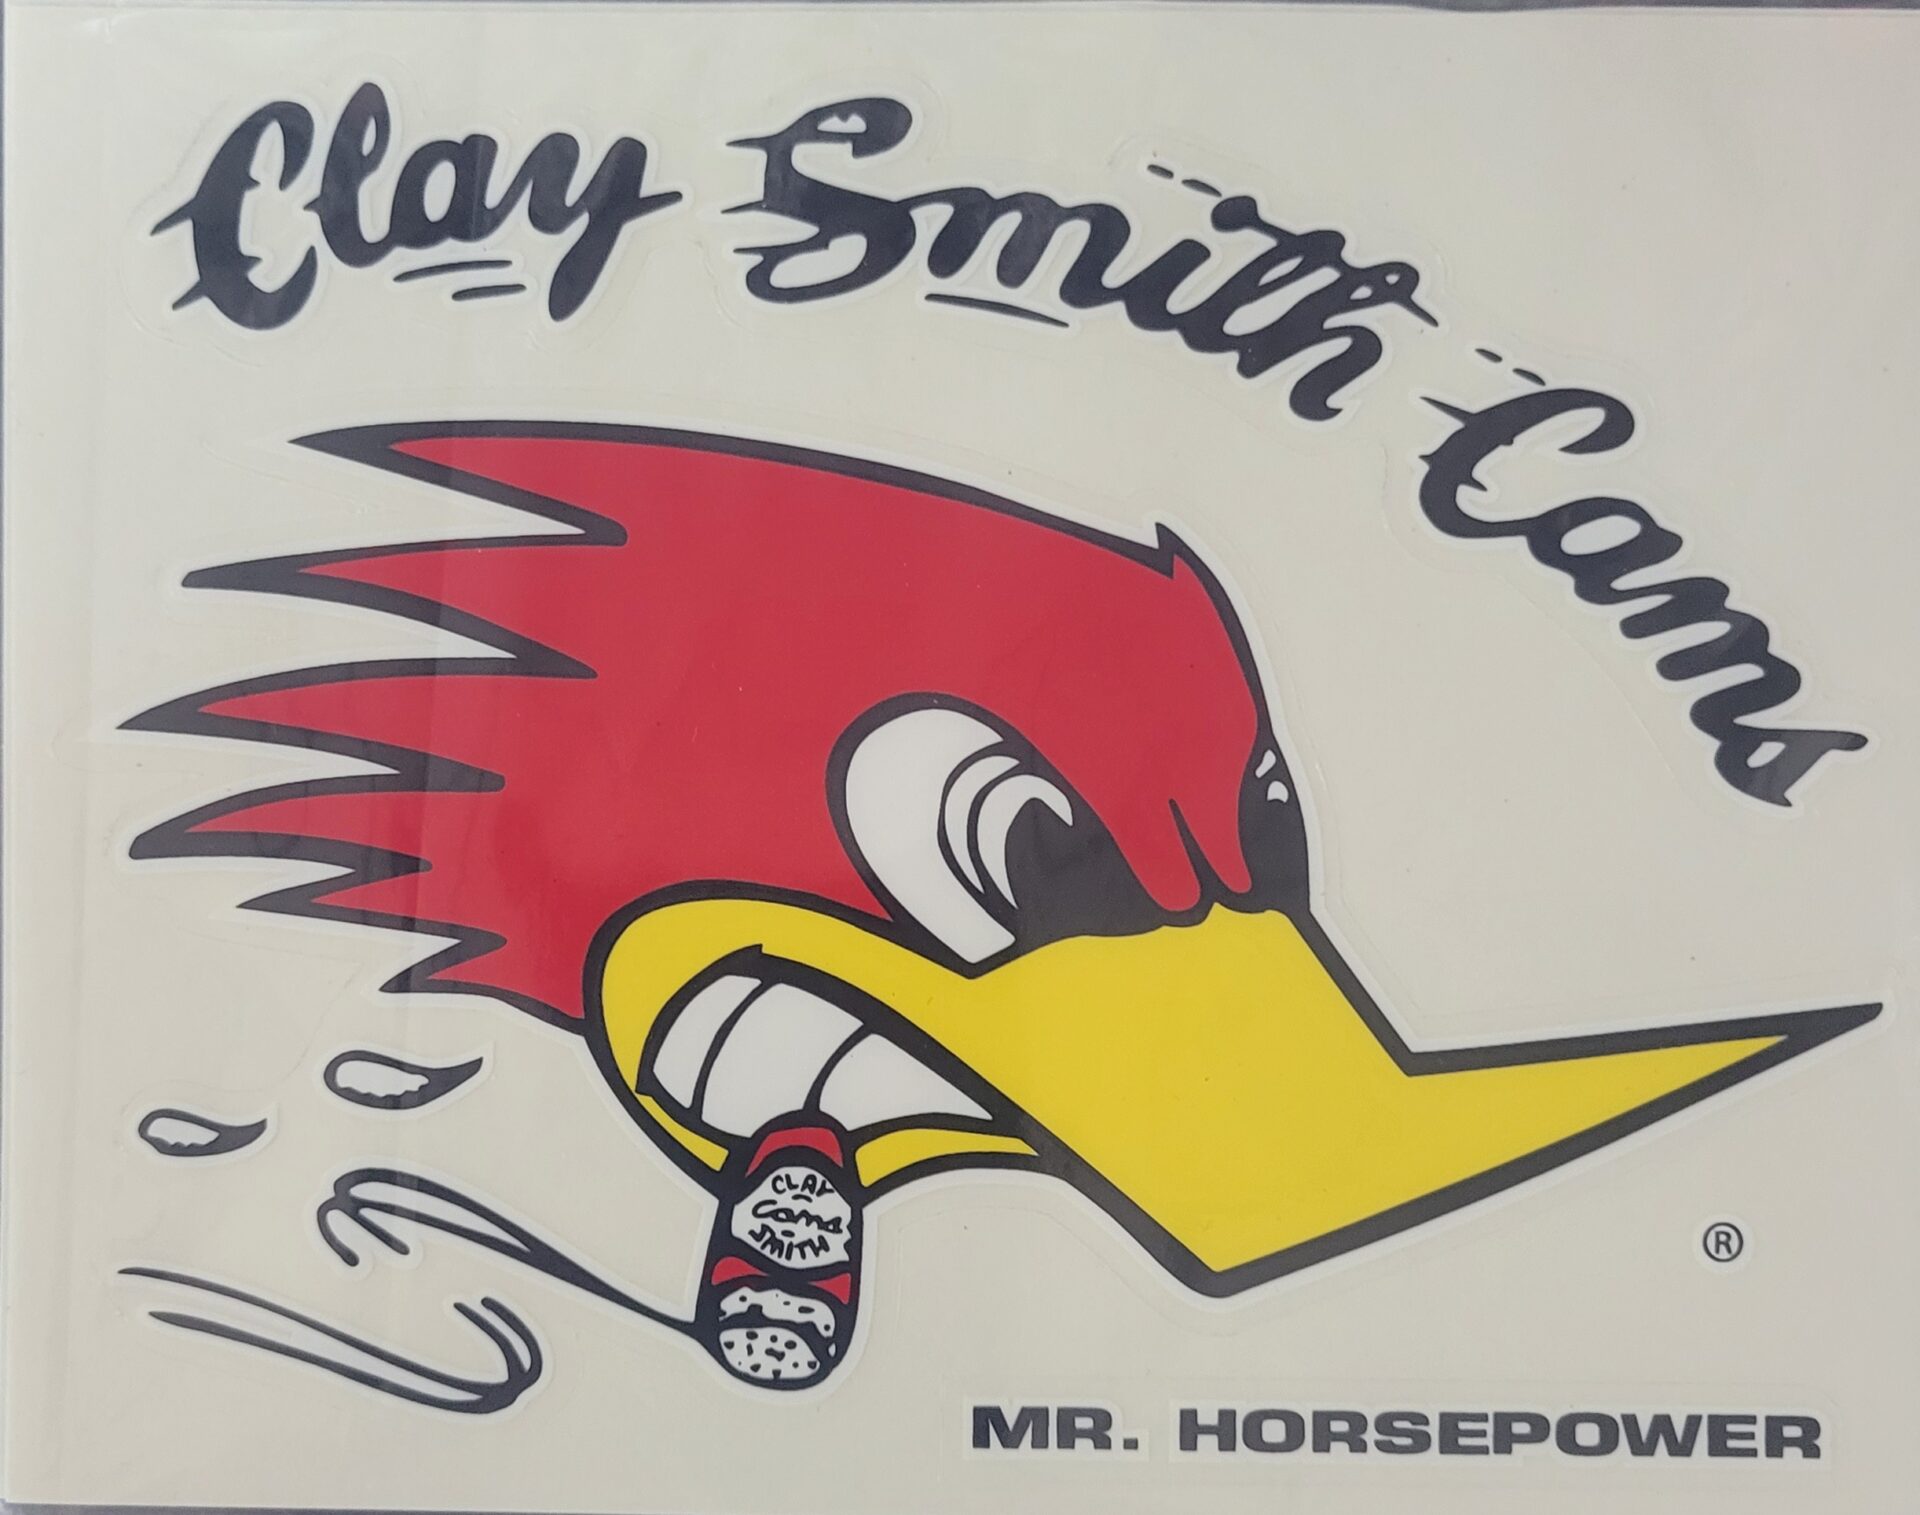 A poster on Clay smith Cams by horsepower